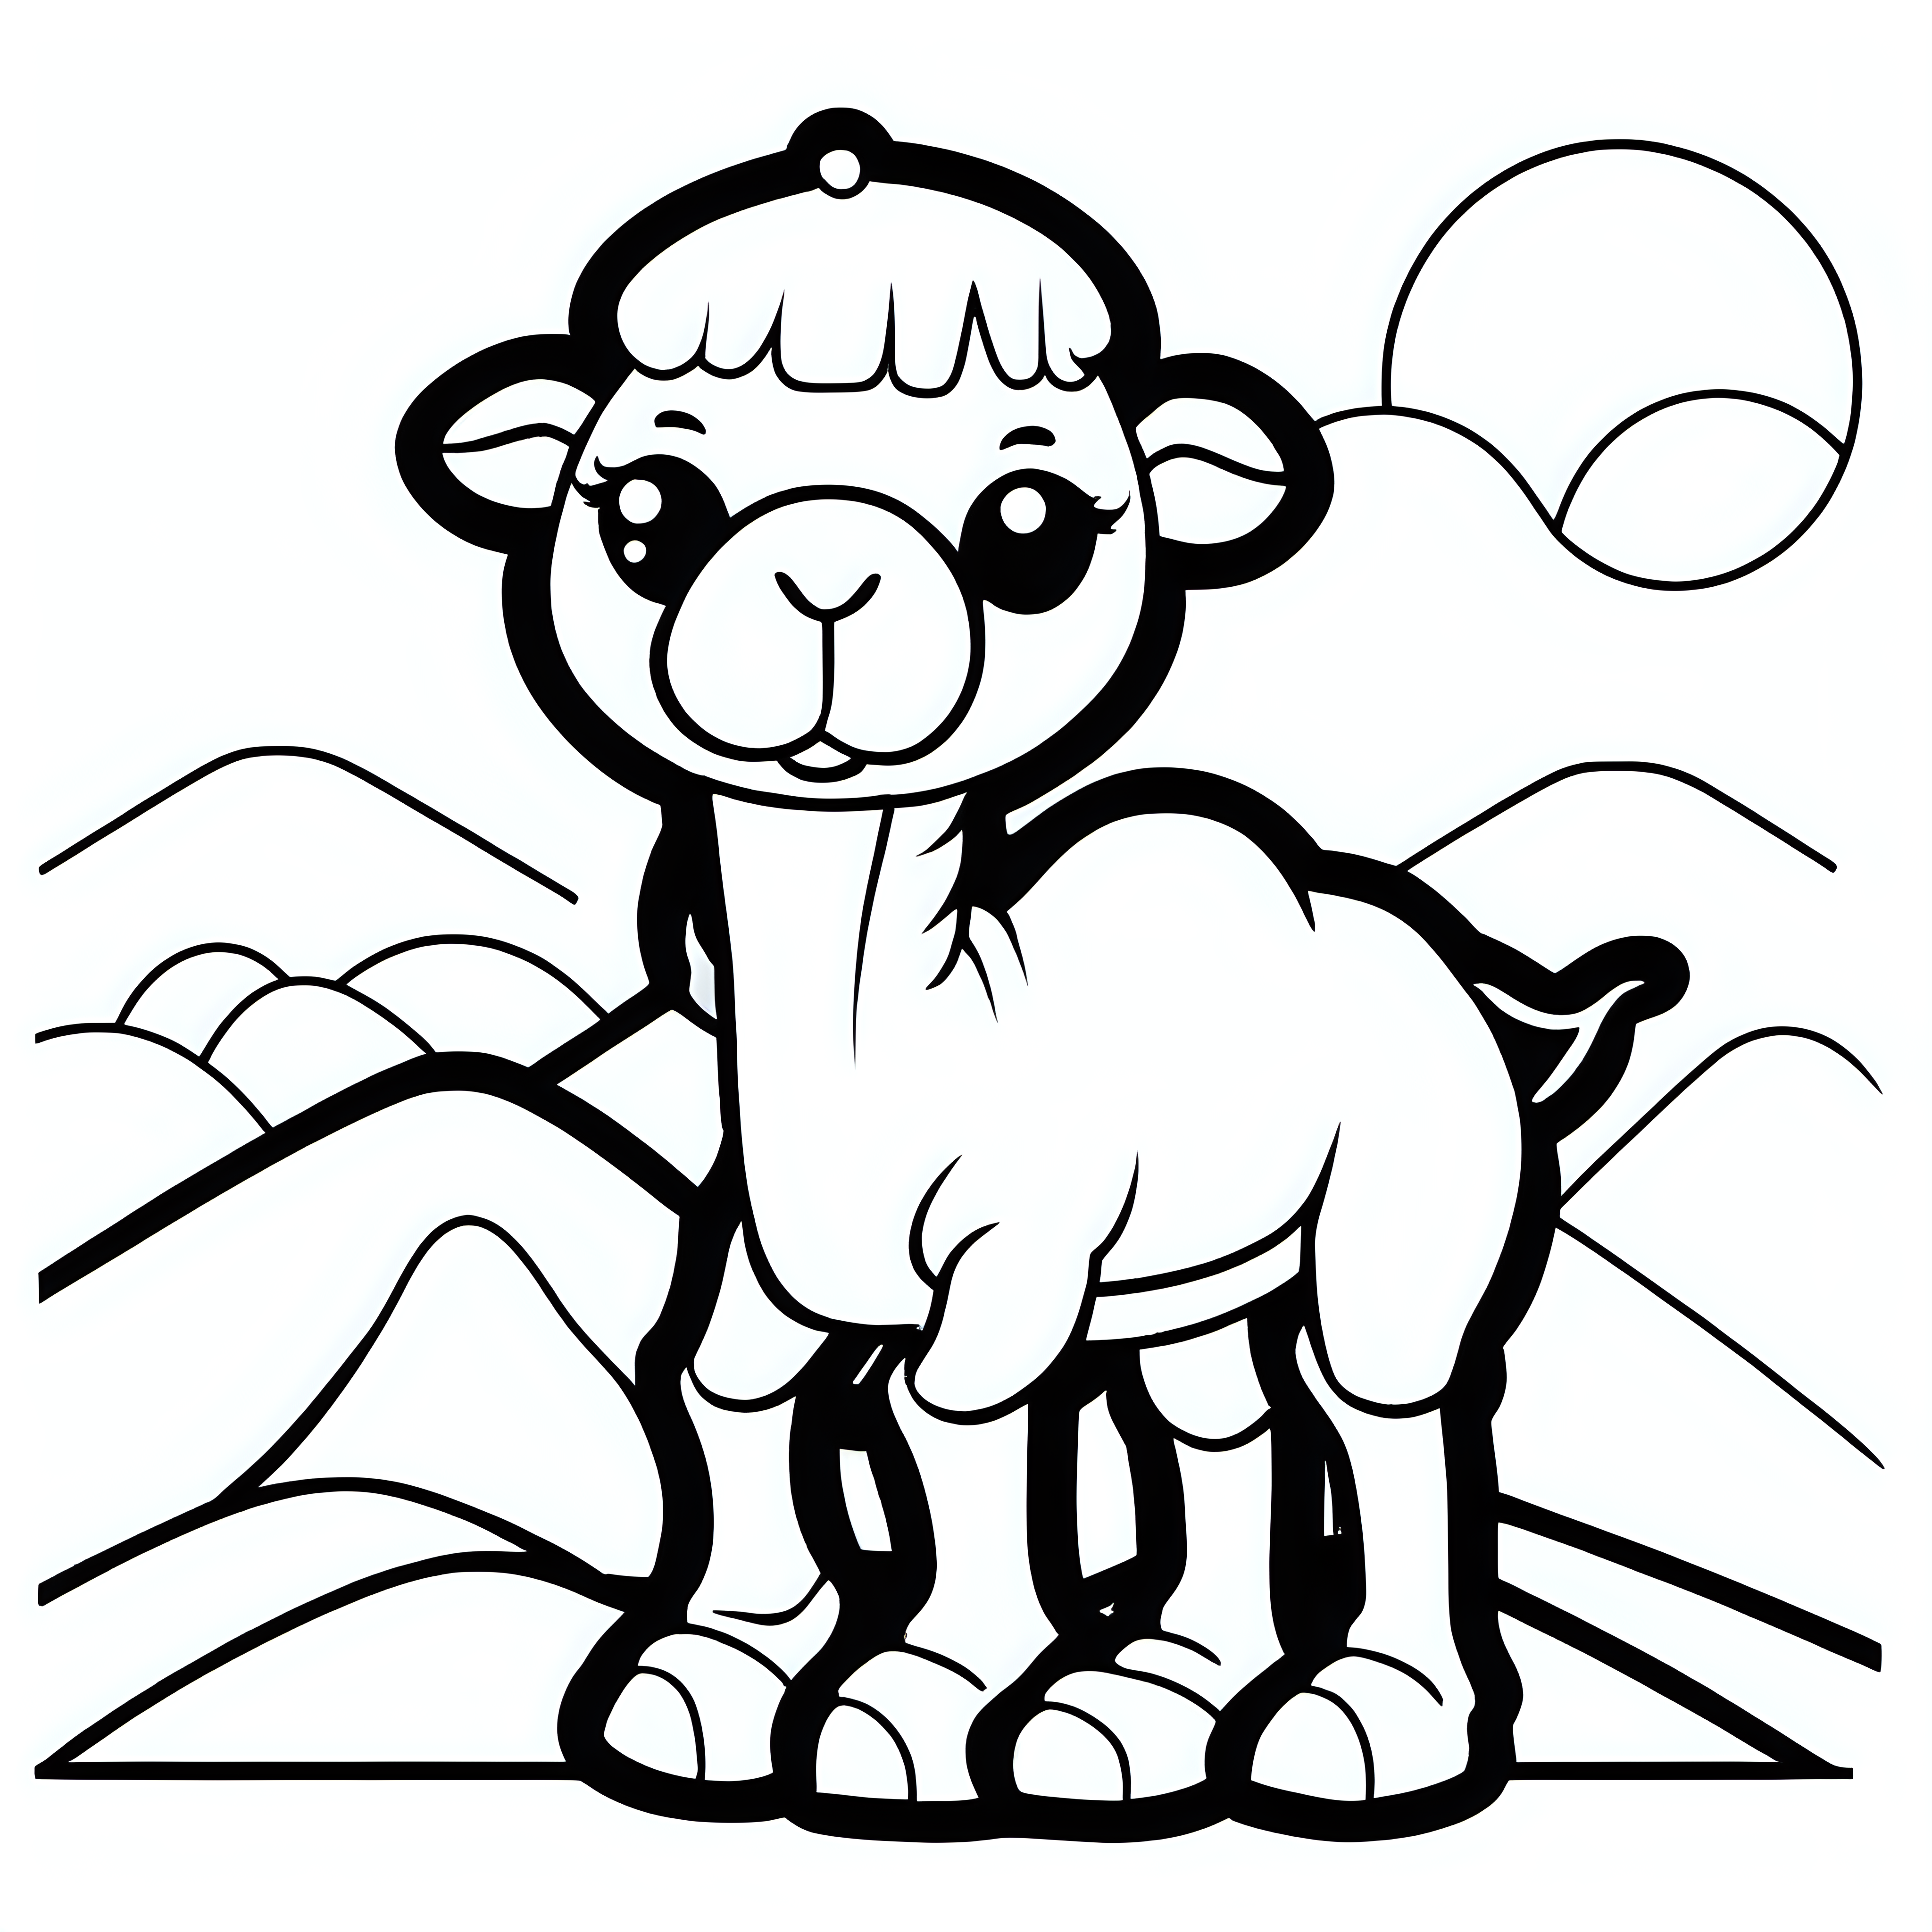 Create a cute Camel, outline in black, simple background, coloring book for kids